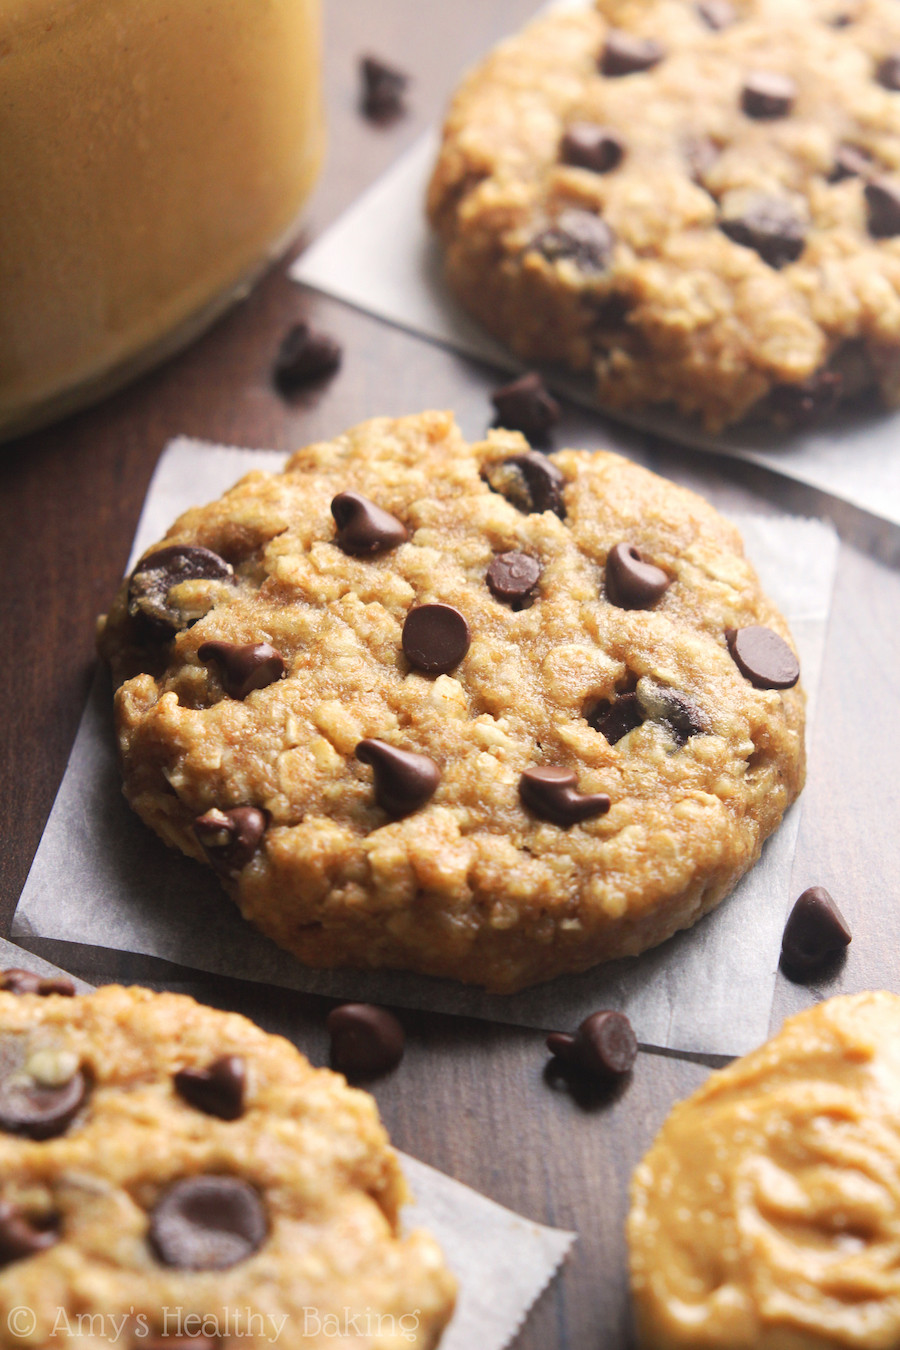 Healthy Chocolate Chip Cookies Recipe
 Chocolate Chip Peanut Butter Oatmeal Cookies Recipe Video